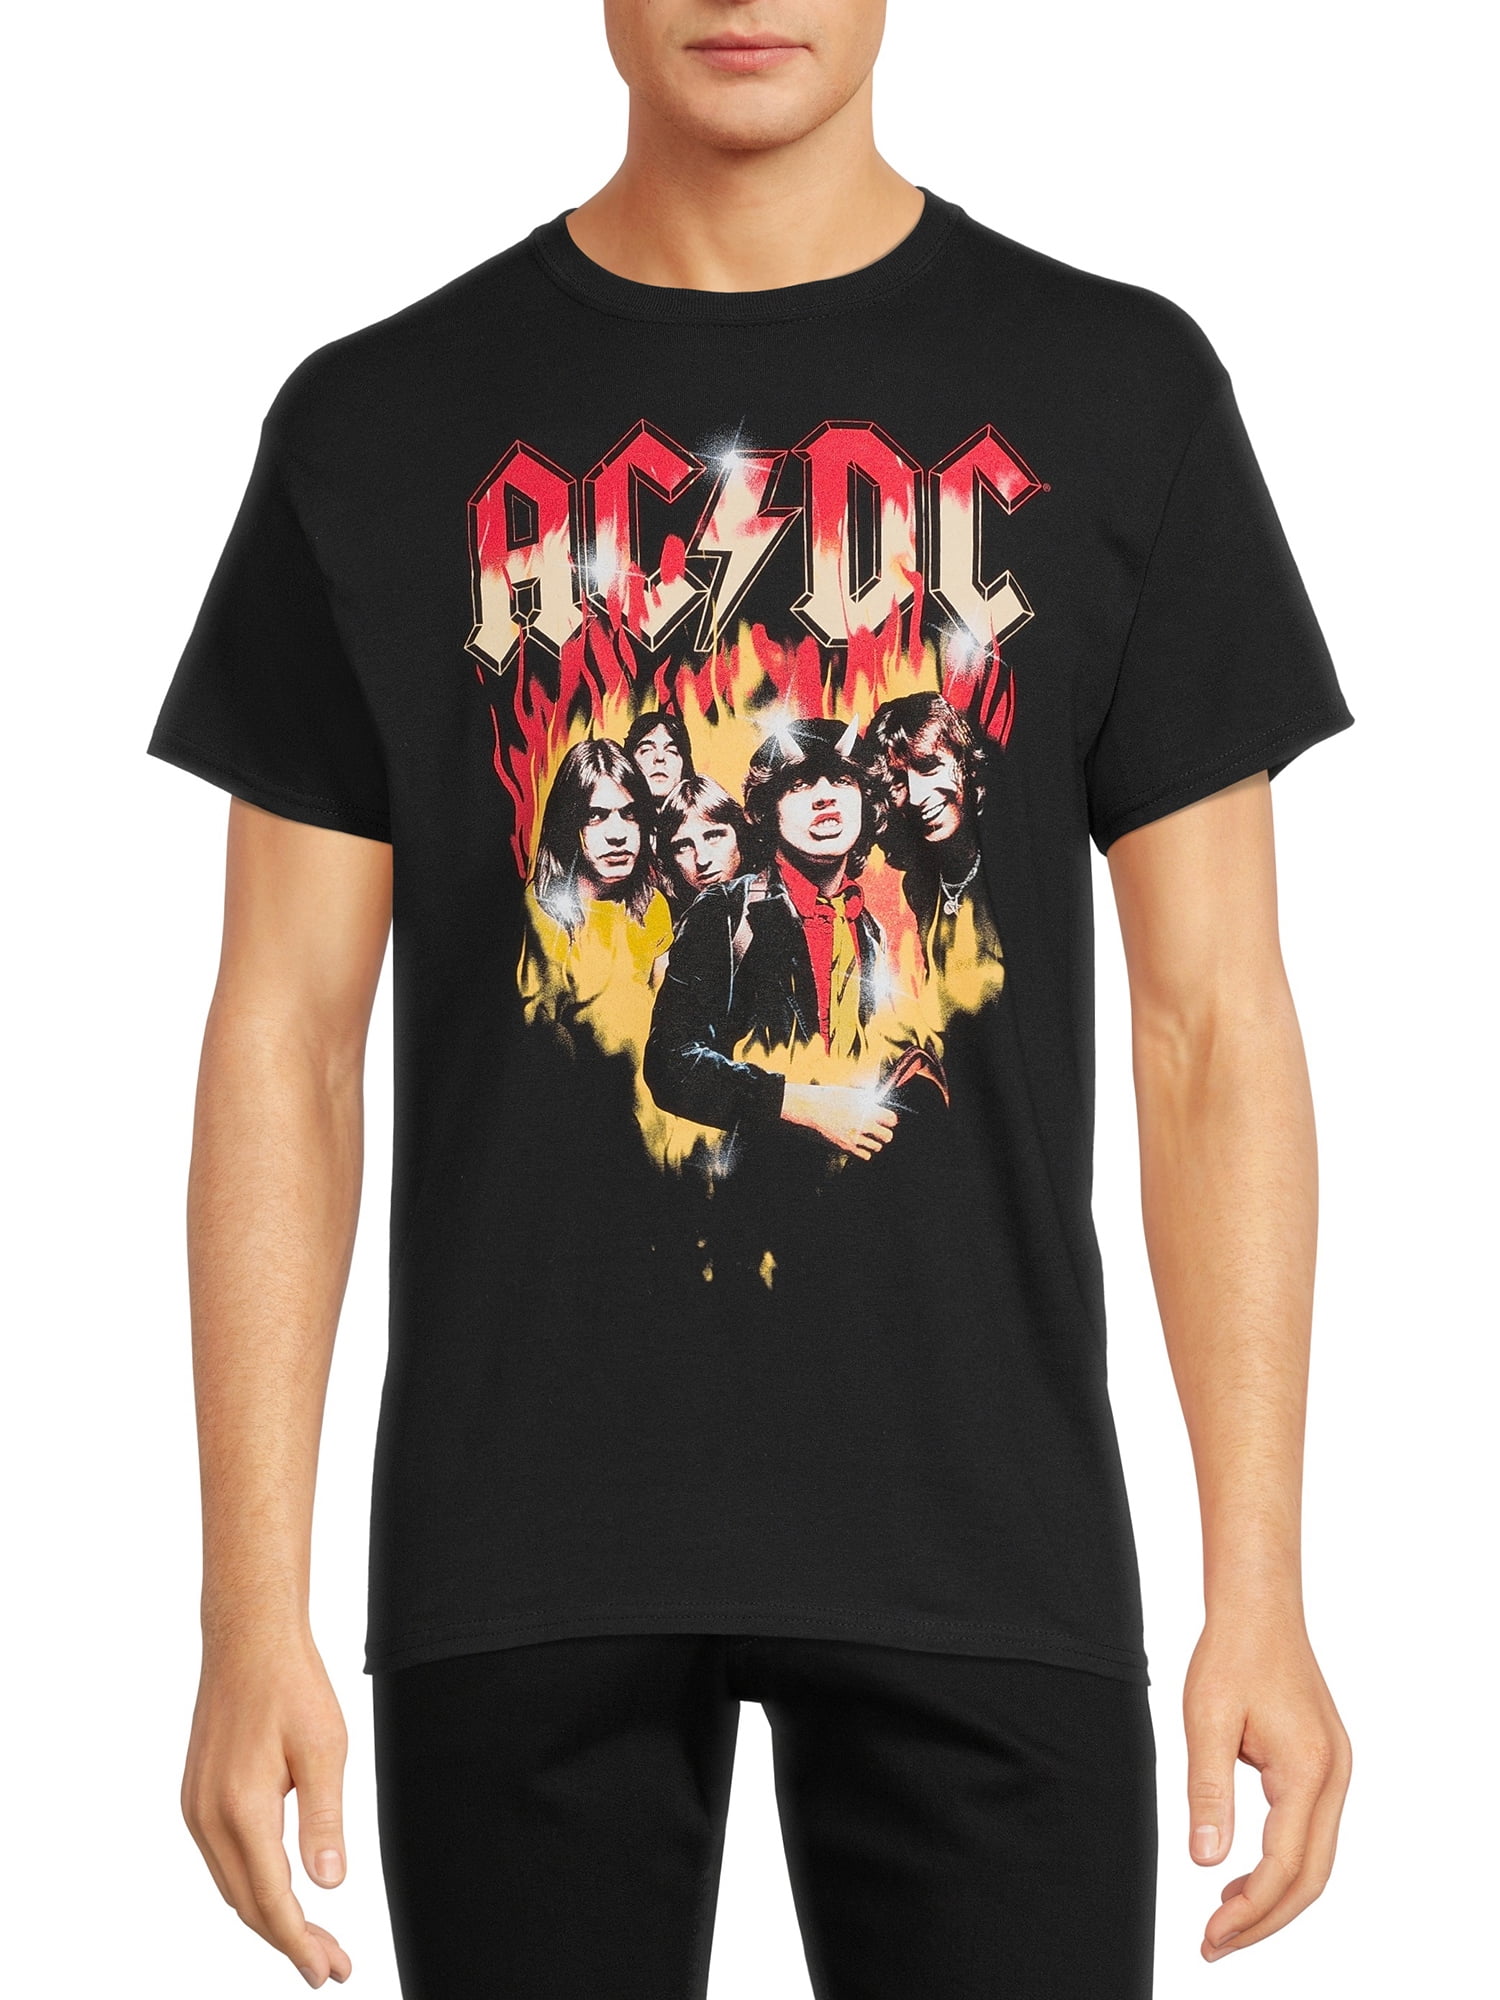 ACDC in Womans T Shirts Short Sleeves Crew Neck Tees Summer Casual Cotton Tops